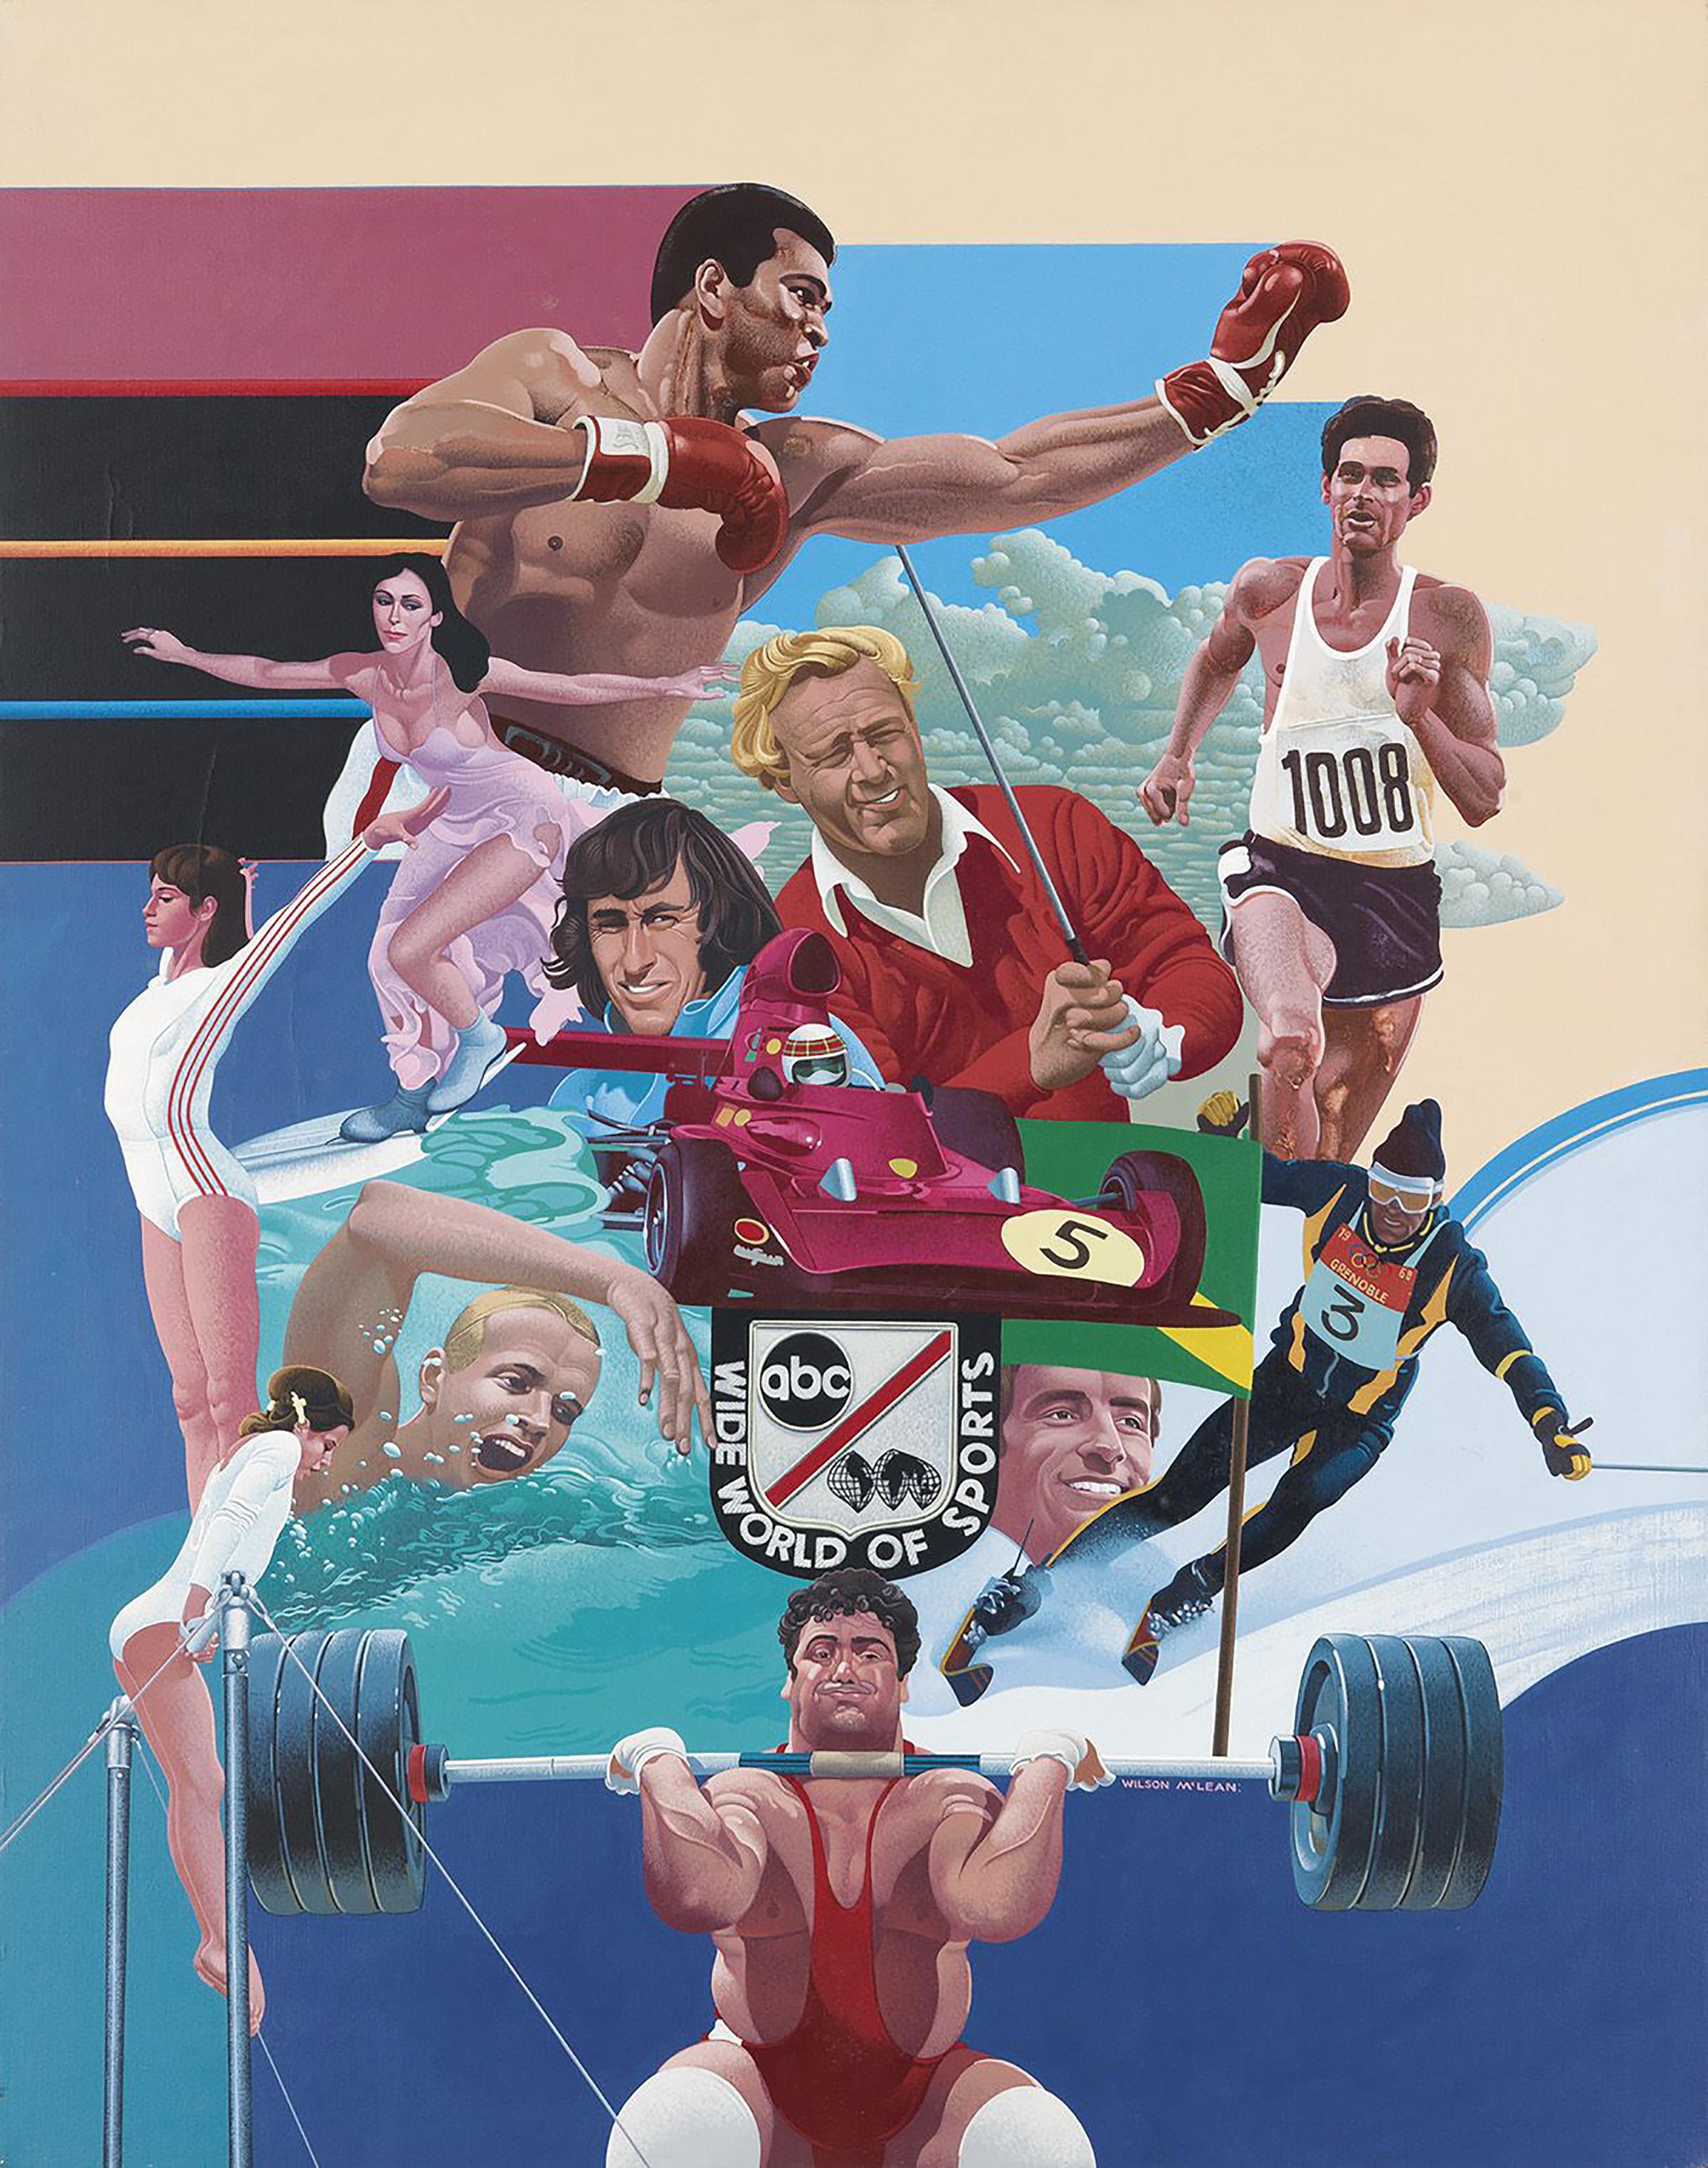 Wilson McLean Portrait Painting - ABC Wide World of Sports, 1968